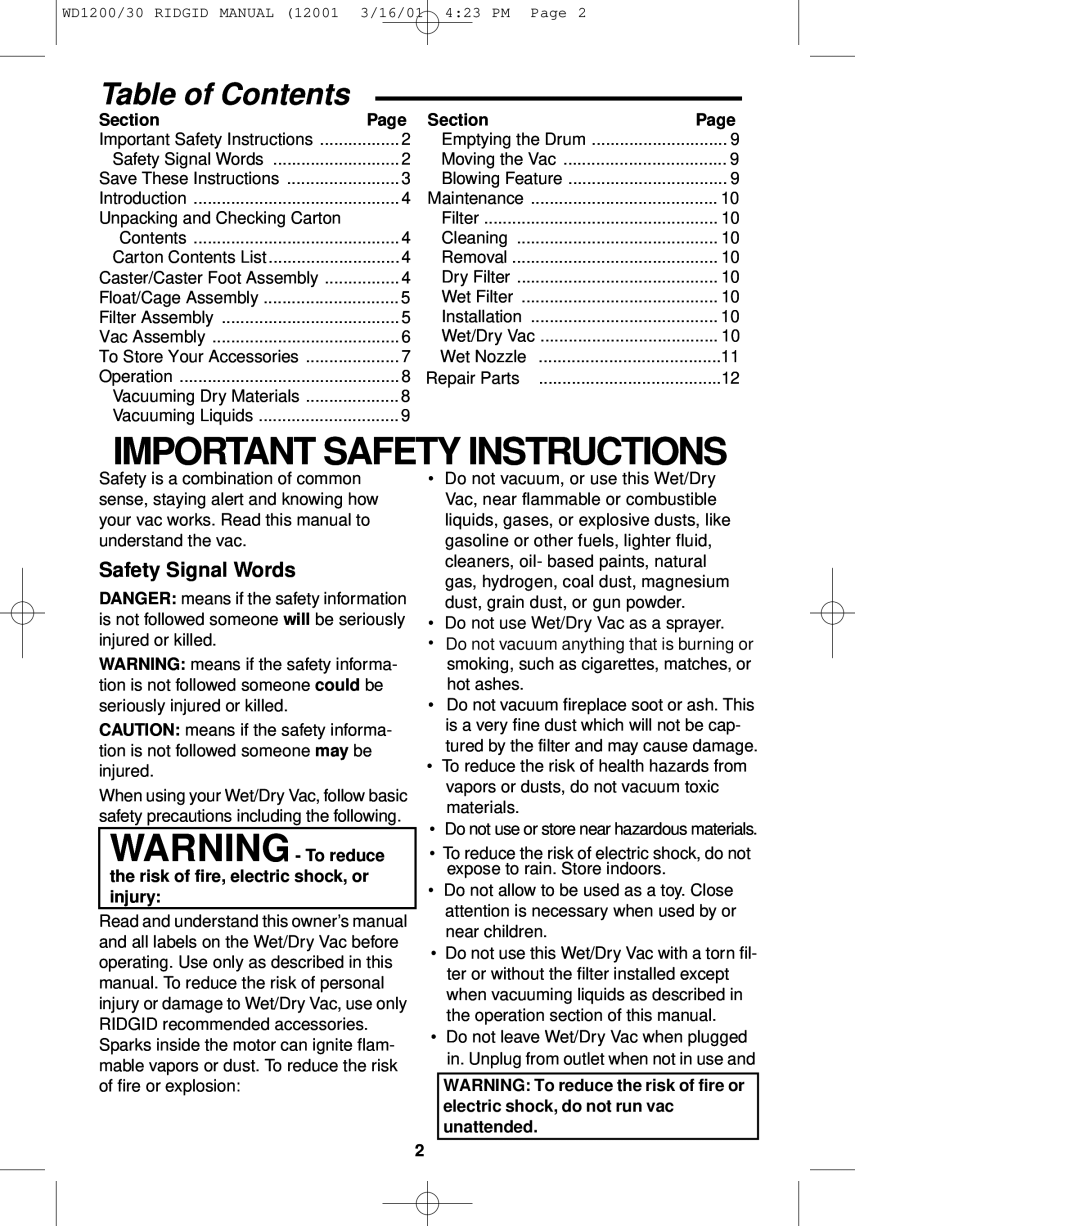 RIDGID WD1230, WD1200 owner manual Important Safety Instructions, Table of Contents, Safety Signal Words 